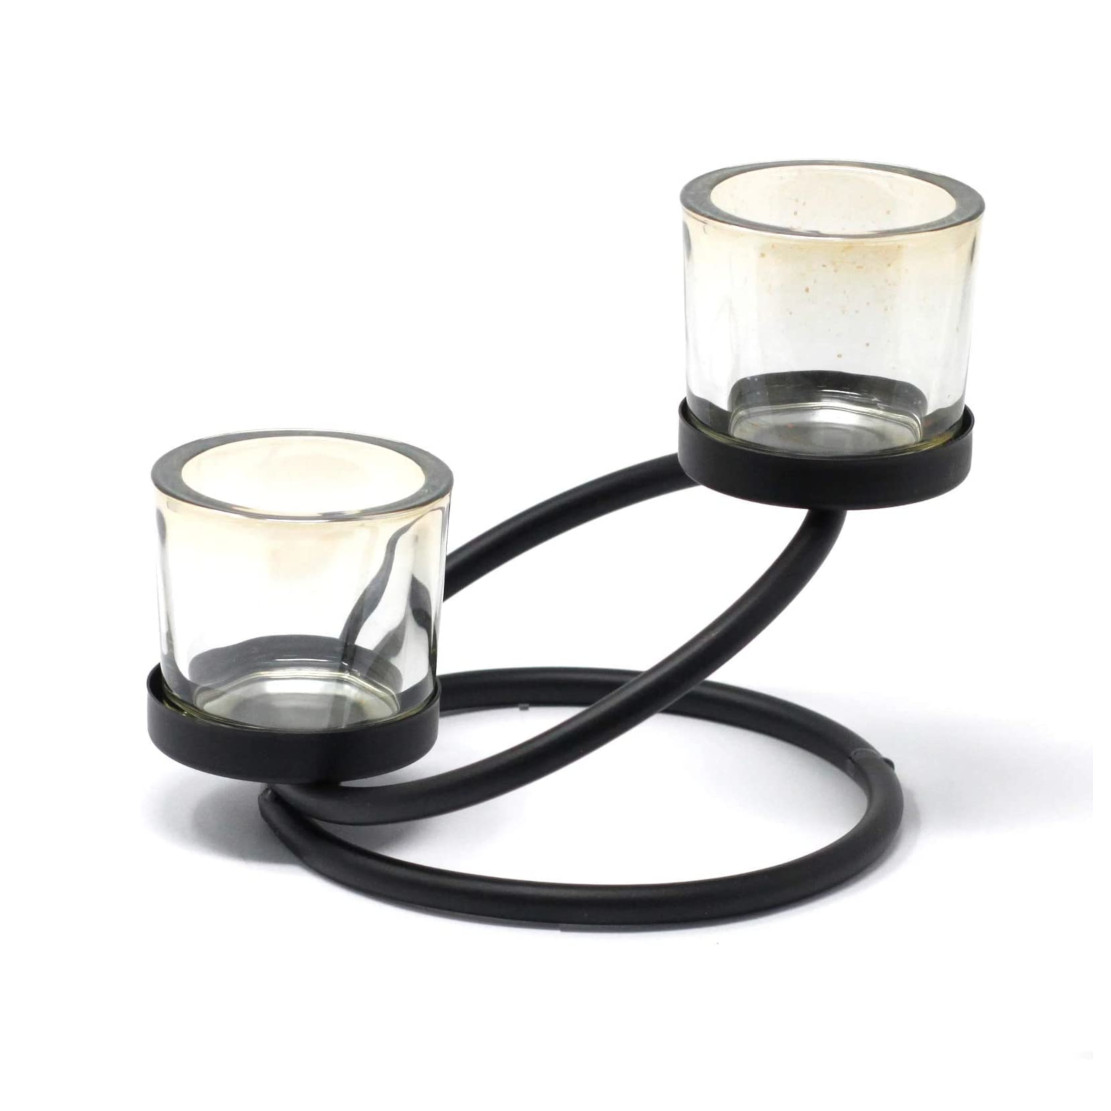 Ancient Wisdom Centerpiece Iron Candle Holder - 2 Cup Double Step